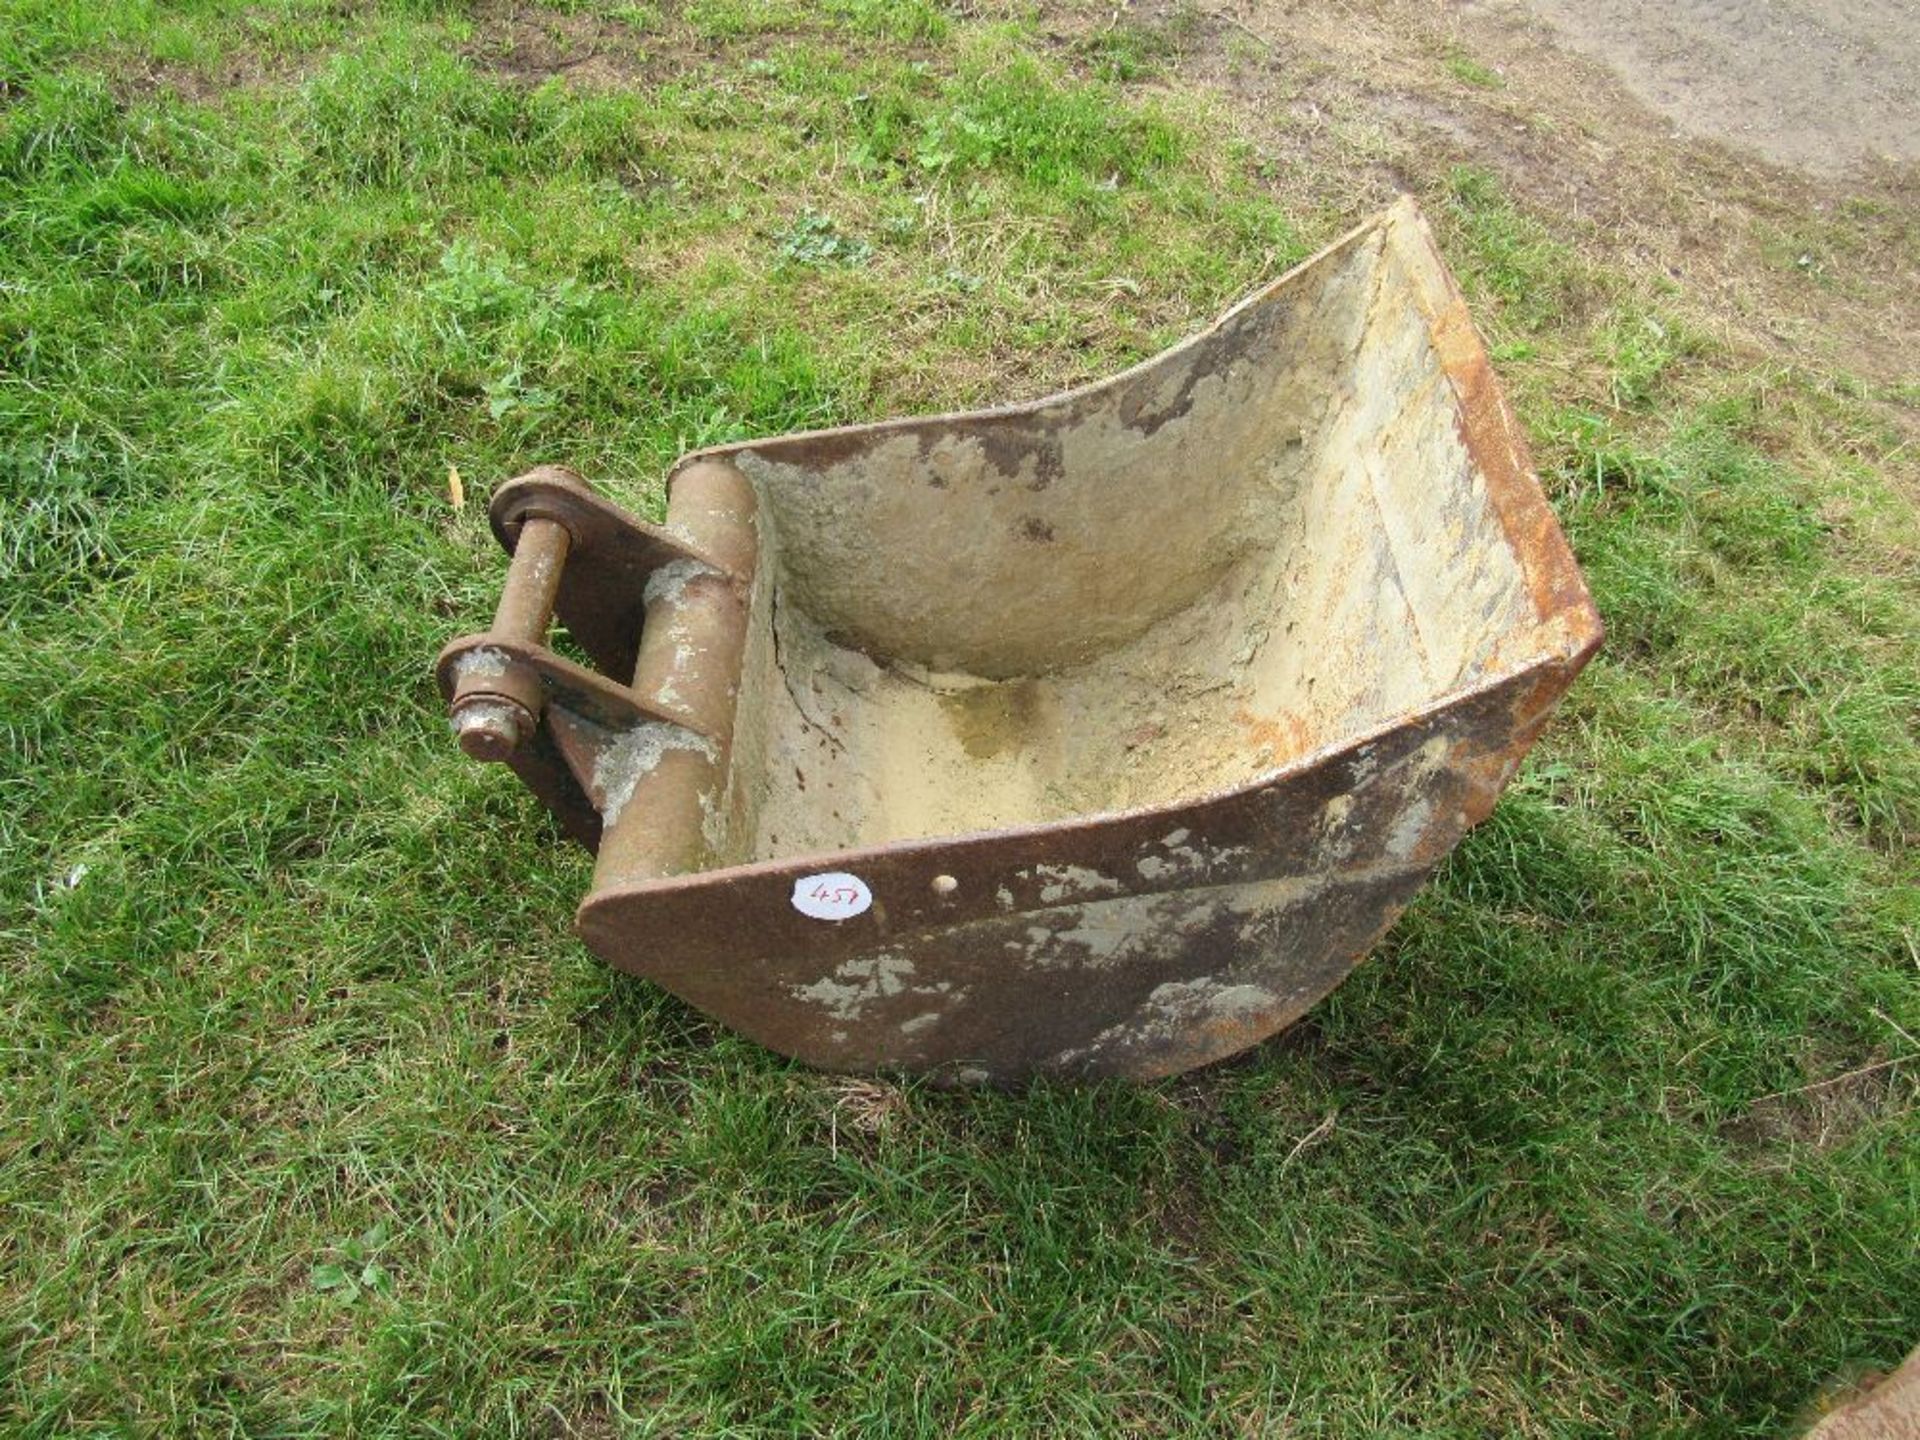 Hyundai 55-3 excavator comes with 3ft ditching bucket, 9" trench bucket, - Image 7 of 10